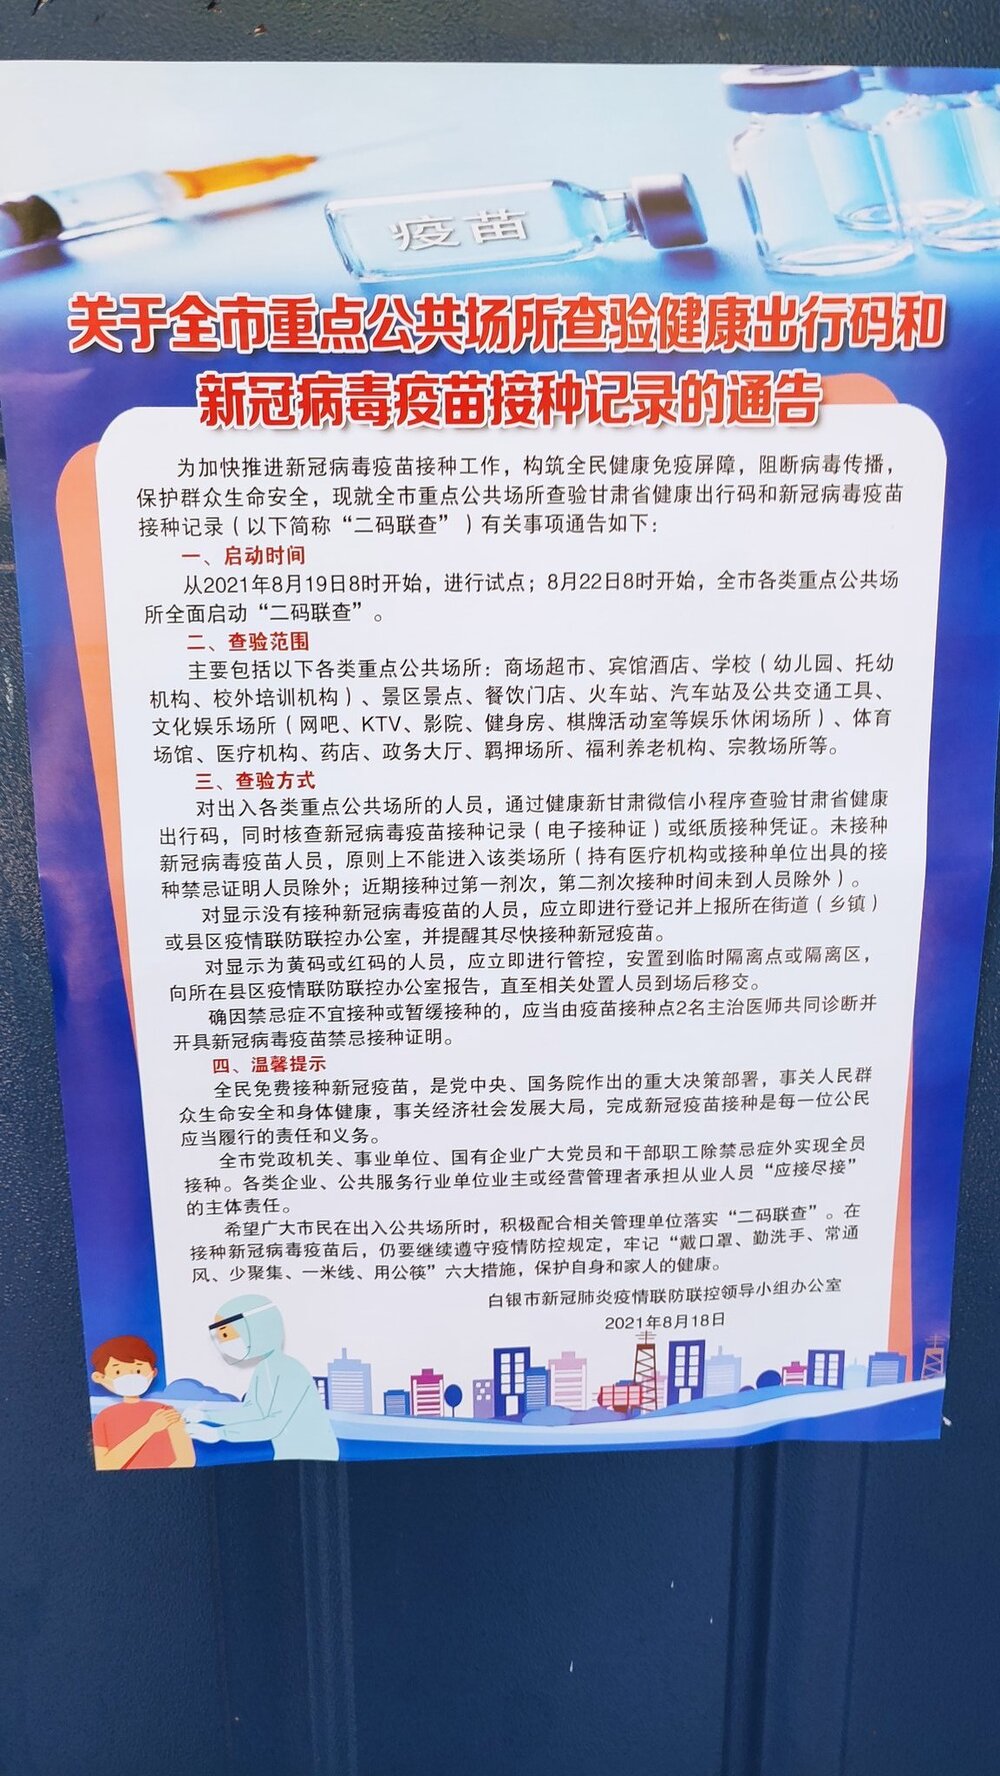 An official notification from Baiyin City, Gangsu Province issued on August 18.